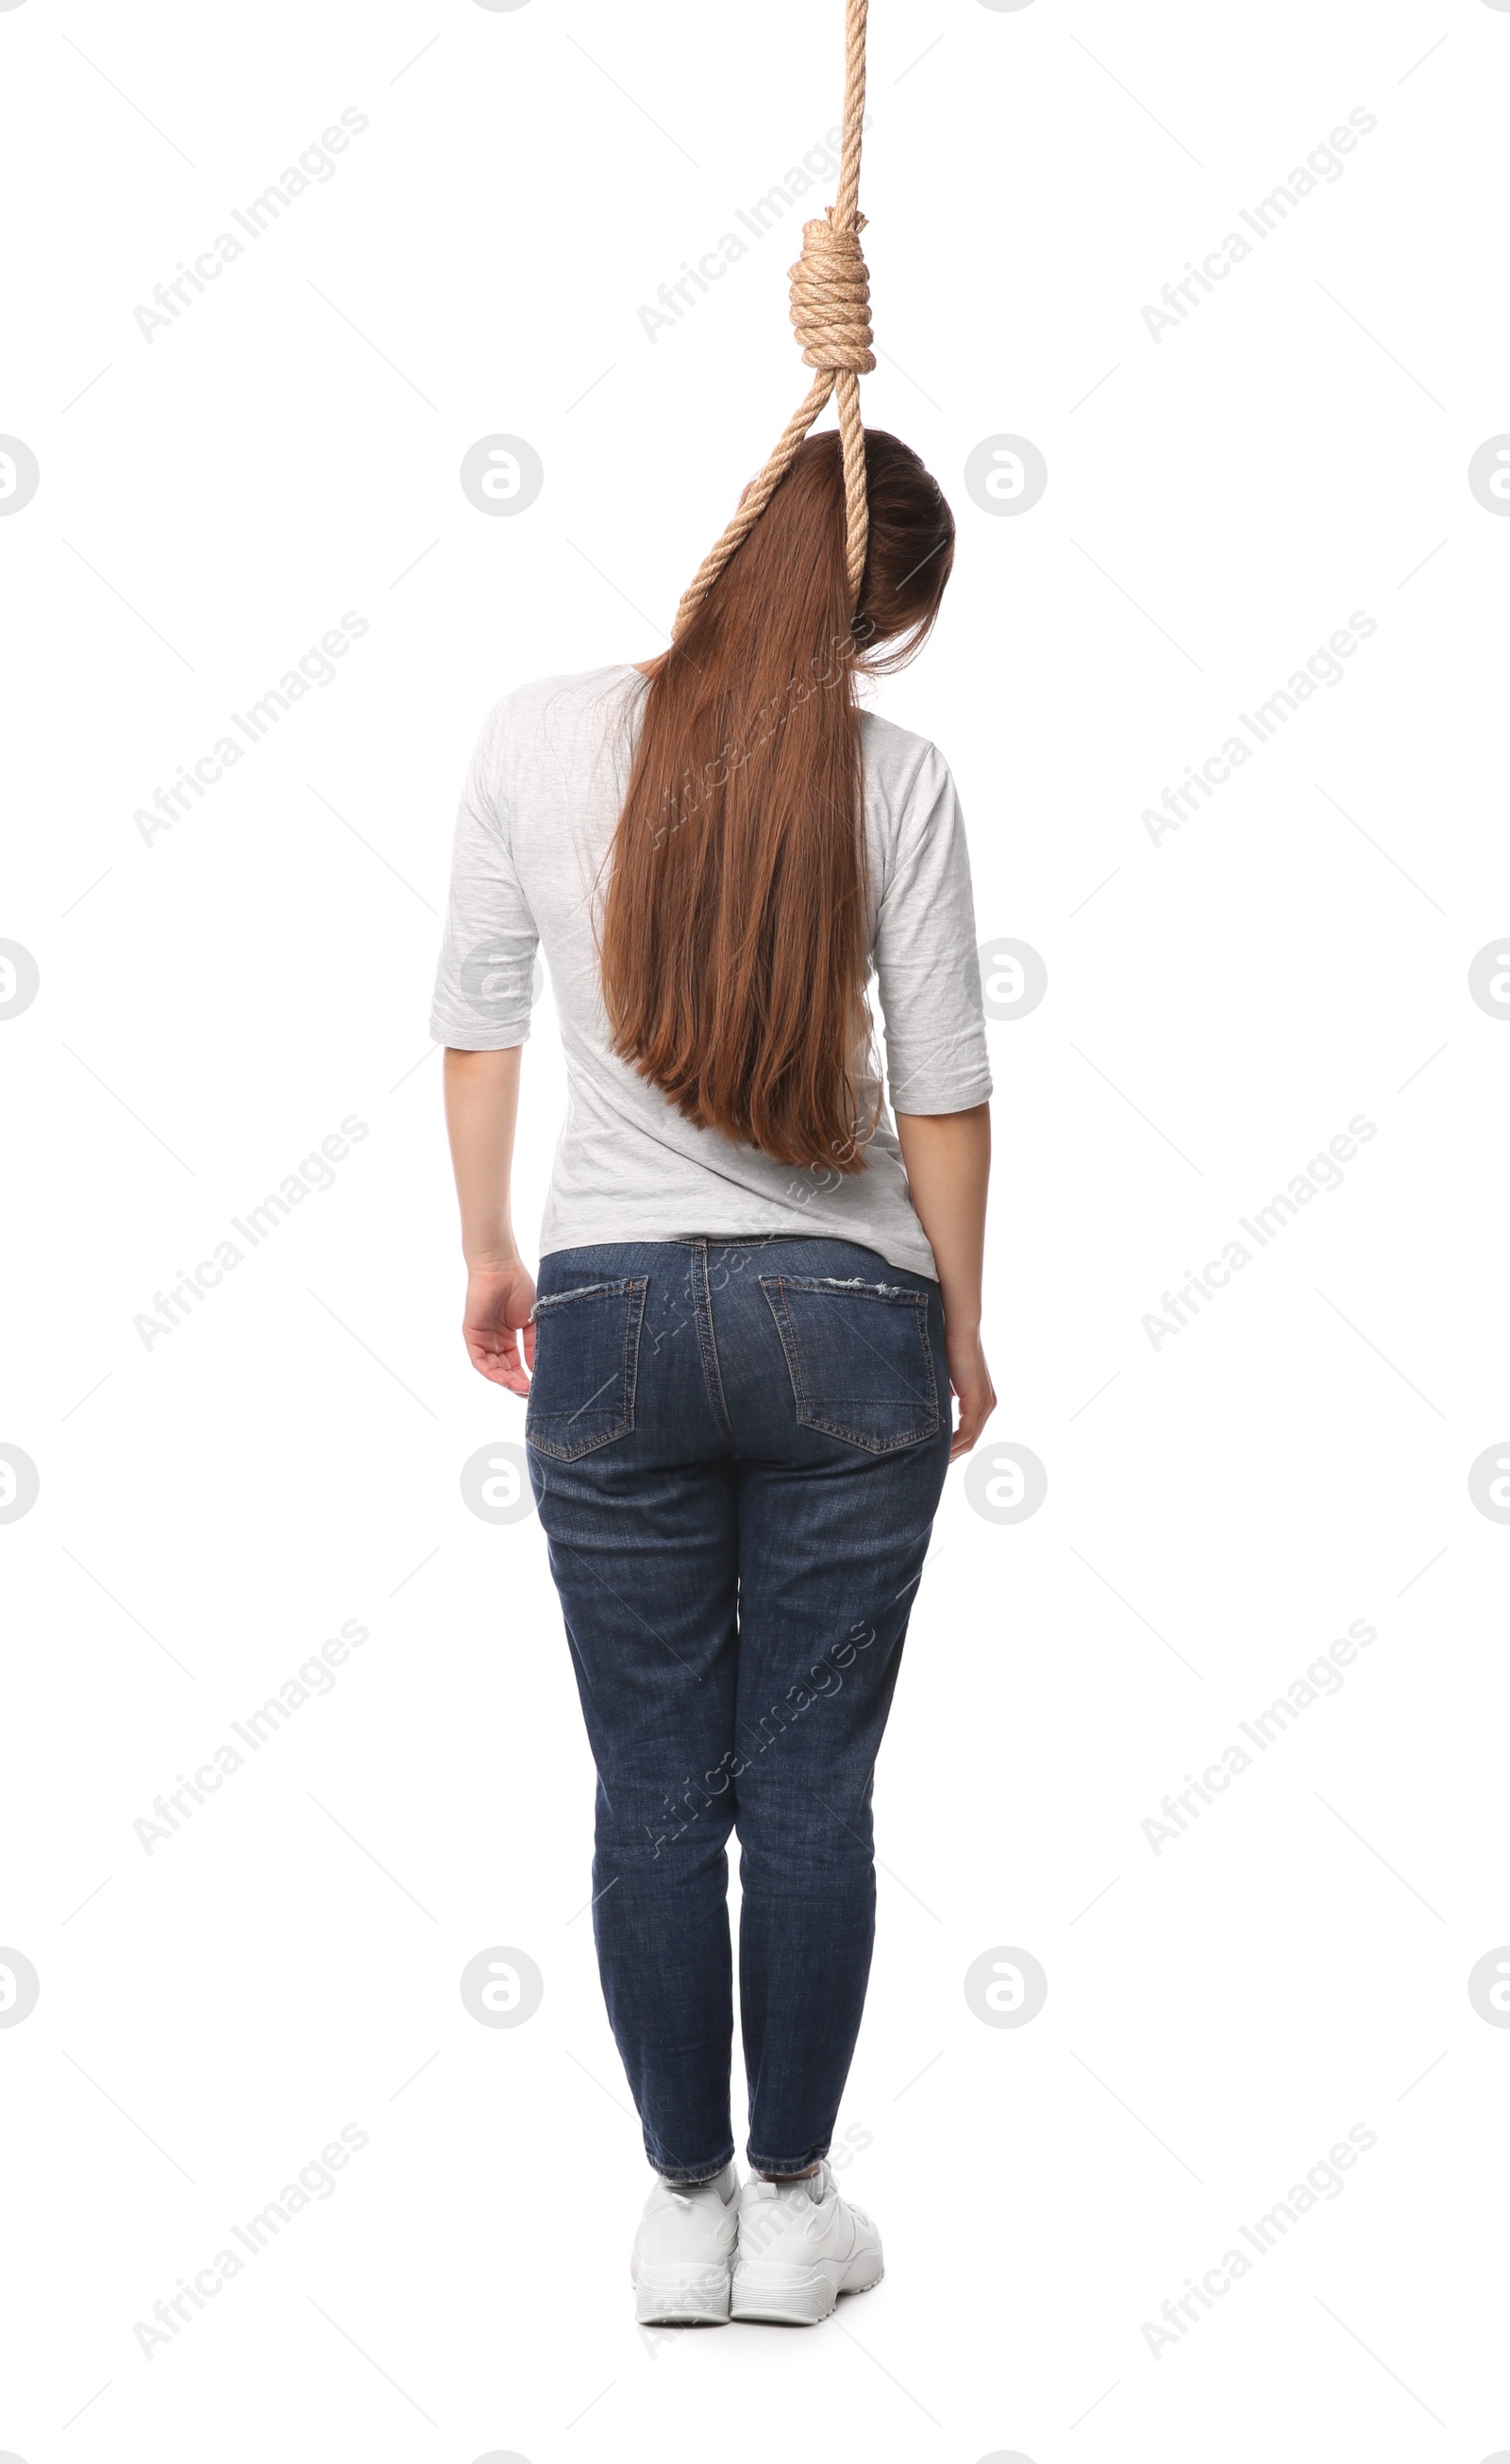 Photo of Woman with rope noose on neck against white background, back view